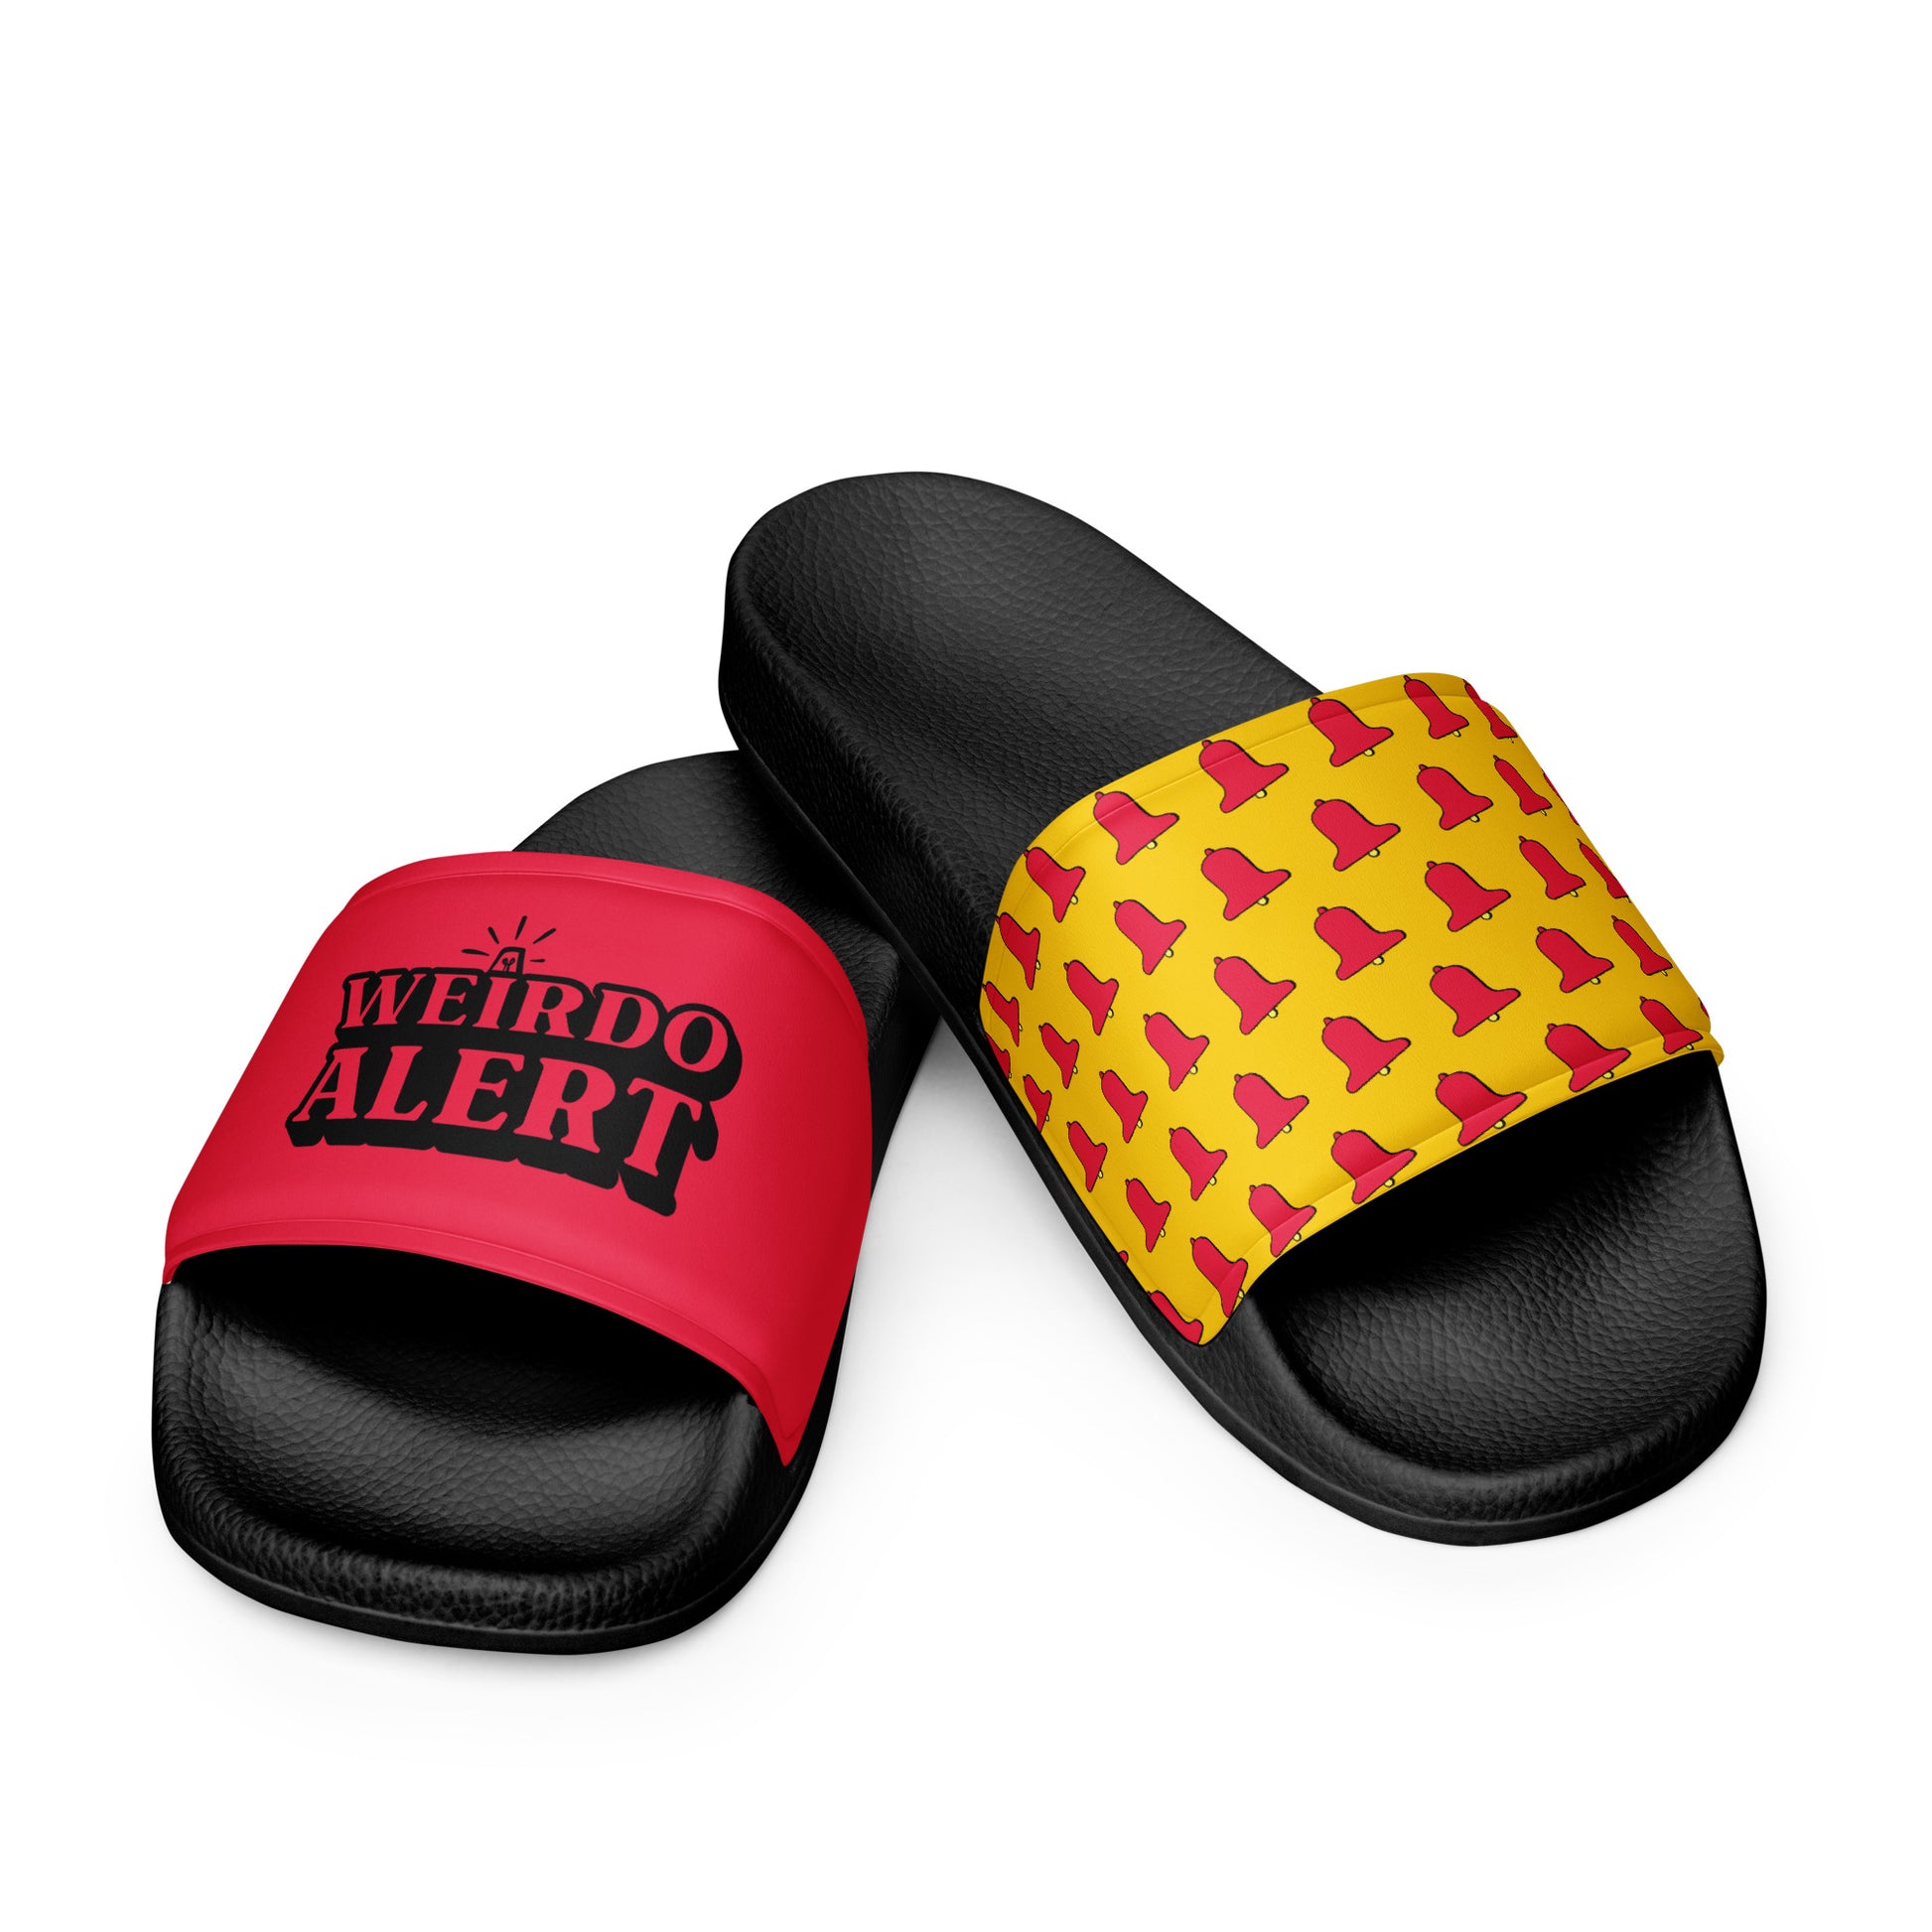 #WEIRDO | Slides for weirdos! Warn your surroundings! Check out more of this stuff in our online giftstore for weirdos!